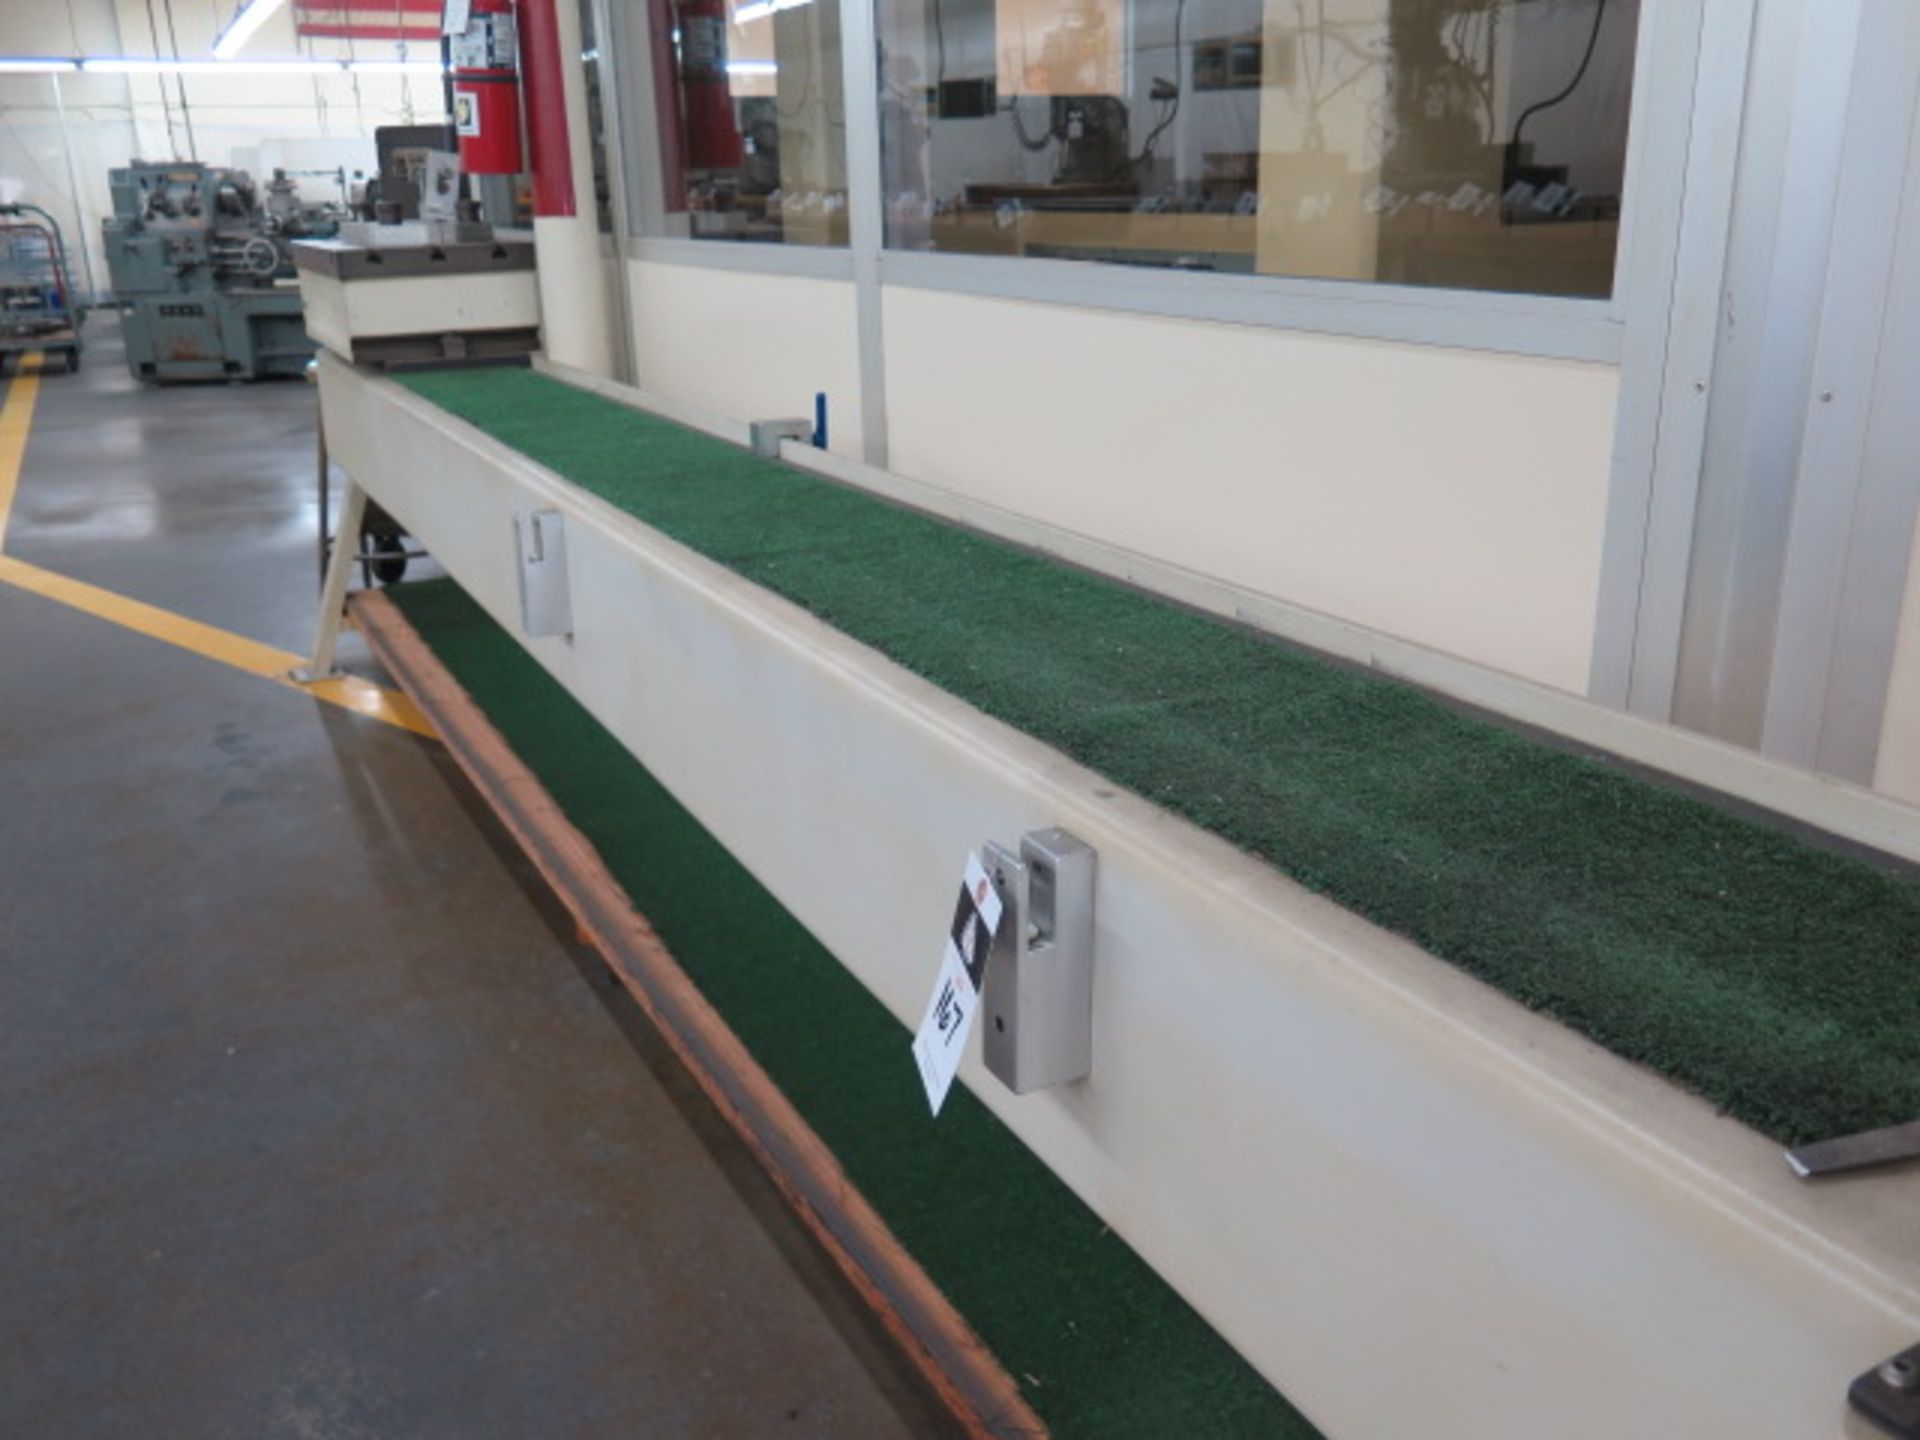 13' Custom 8" Shear Table w/ Elephant ESS-8 8" Hand Shear and 14" x 28" x 9" T=Slot Roser,SOLD AS IS - Image 6 of 6